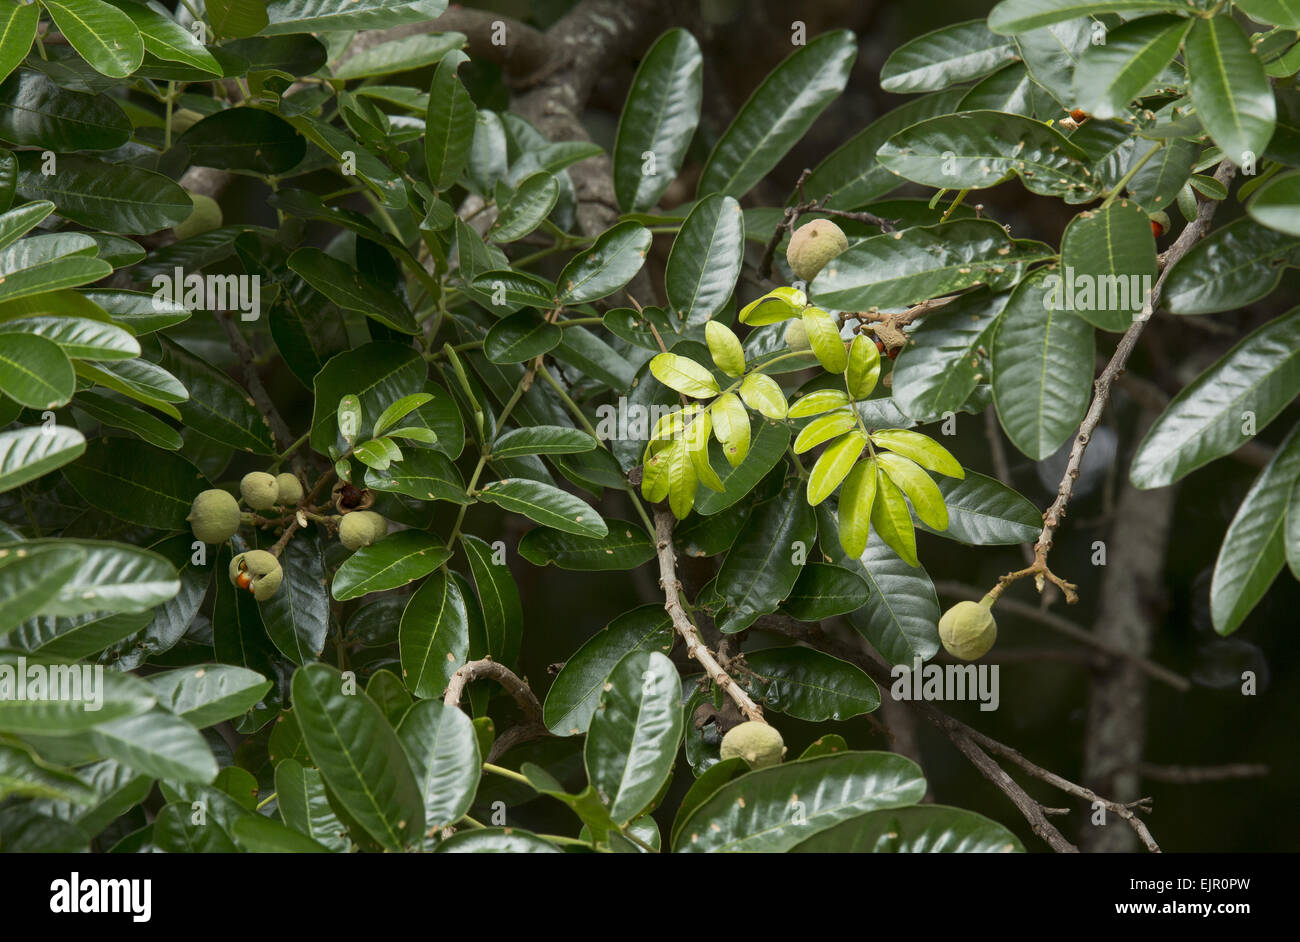 Forest Mahogany (Trichilia dregeana) close-up of leaves and fruit, Kruger N.P., Great Limpopo Transfrontier Park, South Africa, Stock Photo